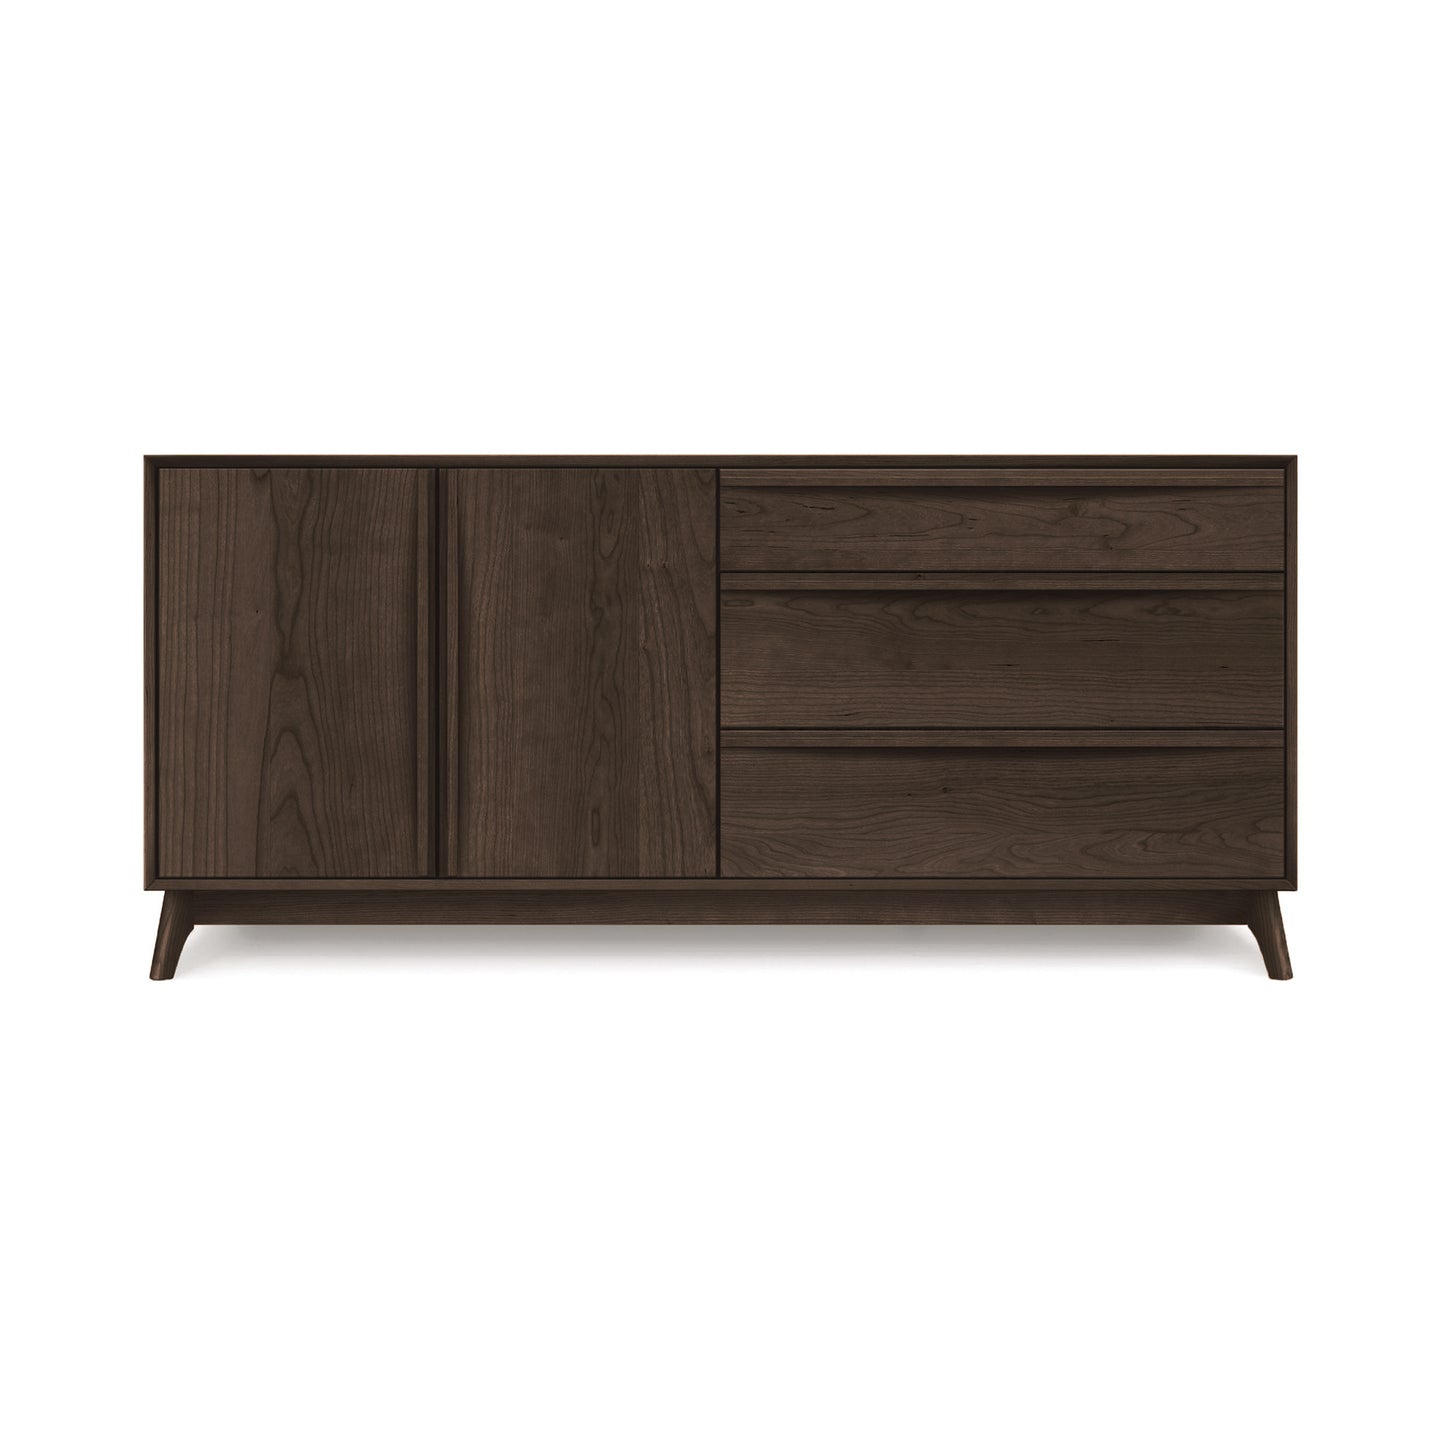 A luxury dining furniture piece, this Copeland Furniture Catalina 3-Drawers, 2-Door Buffet features closed drawers and doors on a plain background.